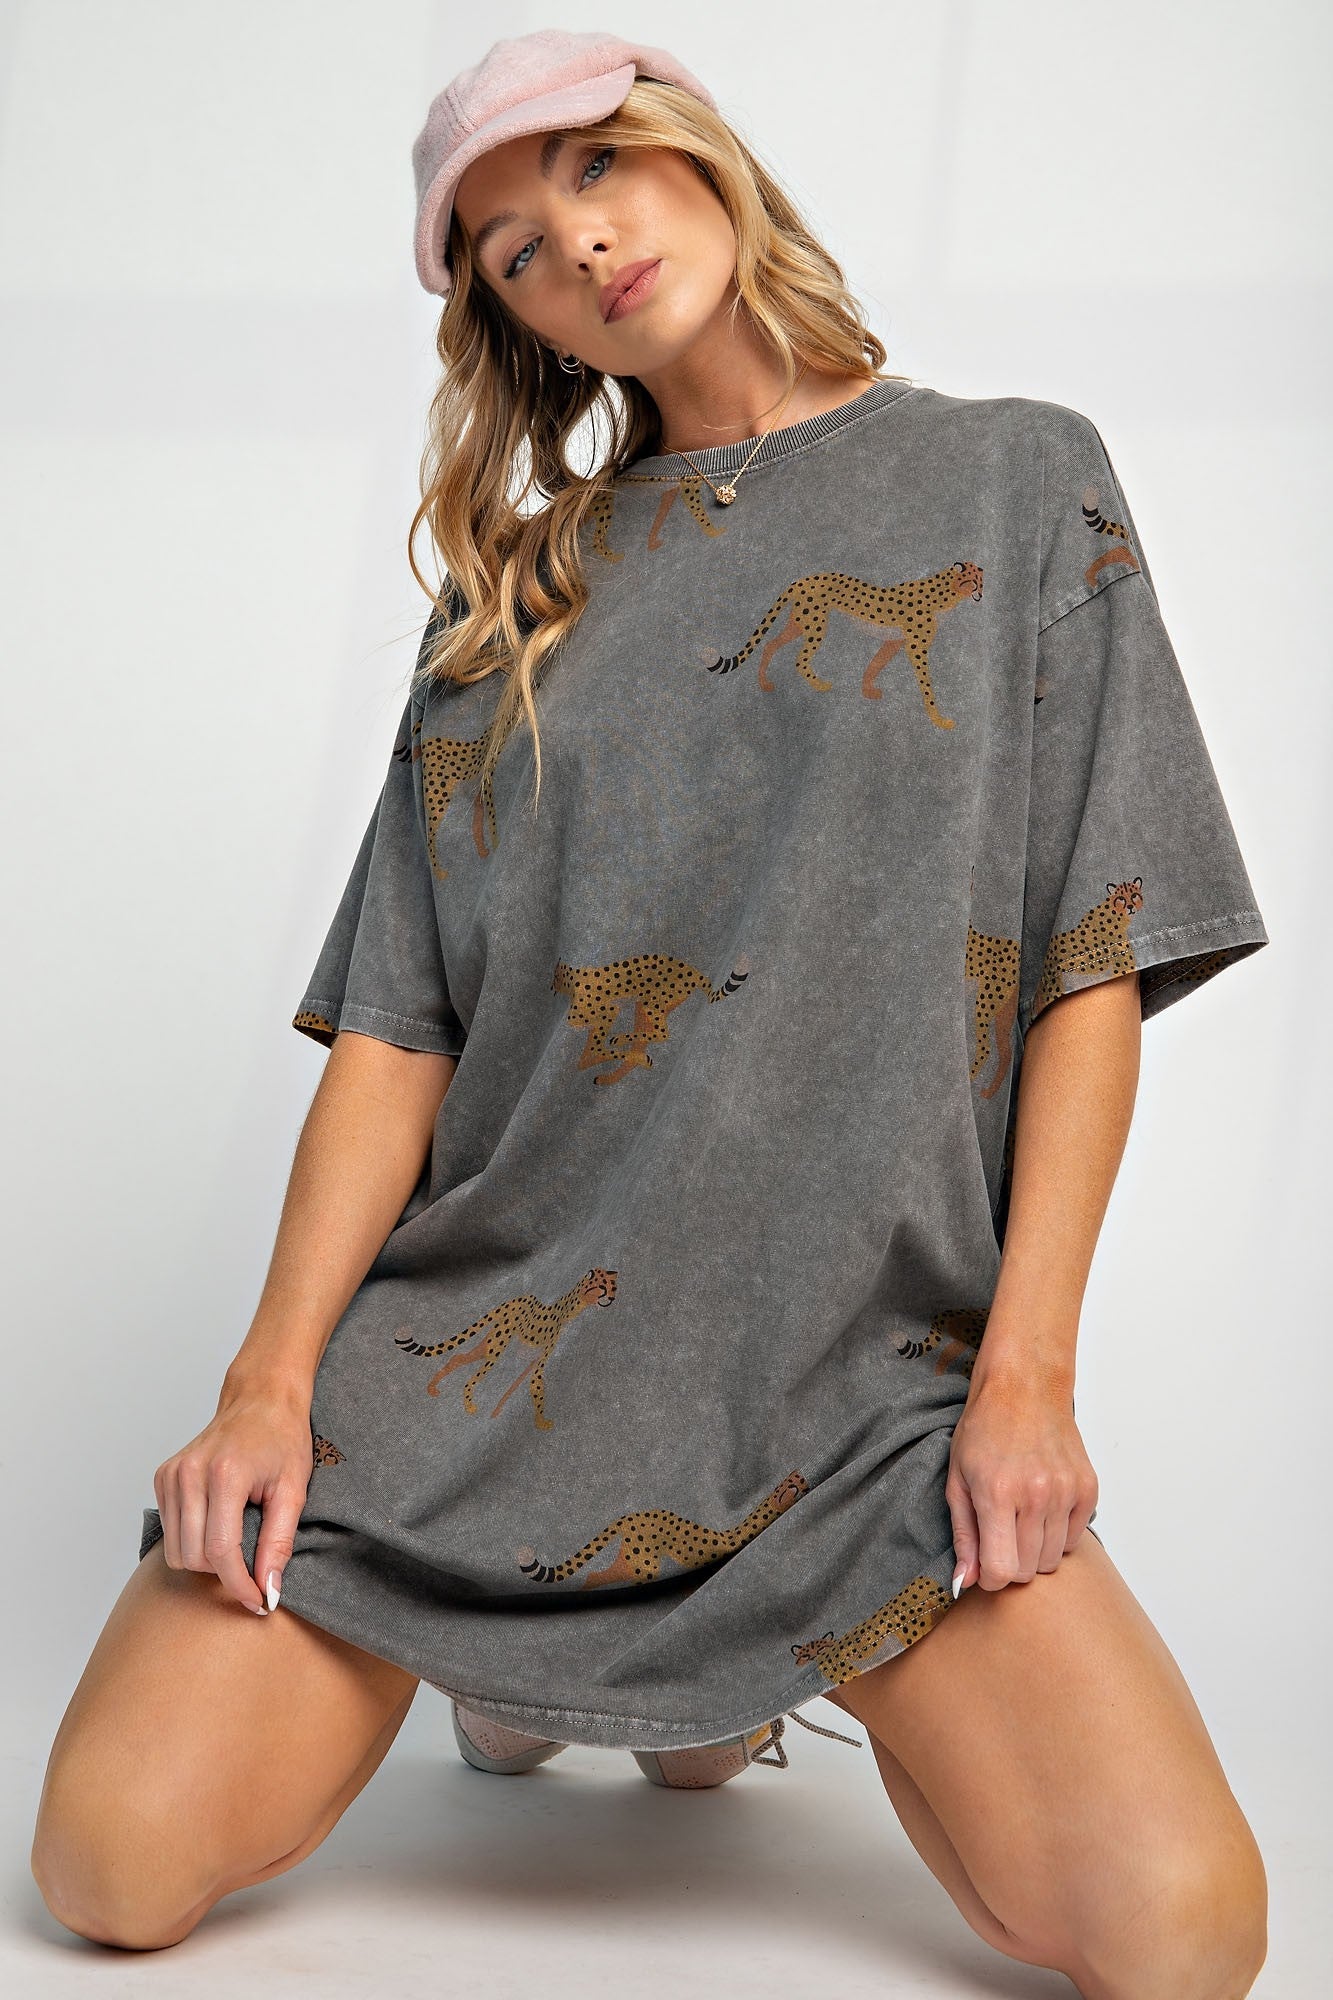 "Cheetah Or Not" T-Shirt Dress (Grey) - Happily Ever Aften